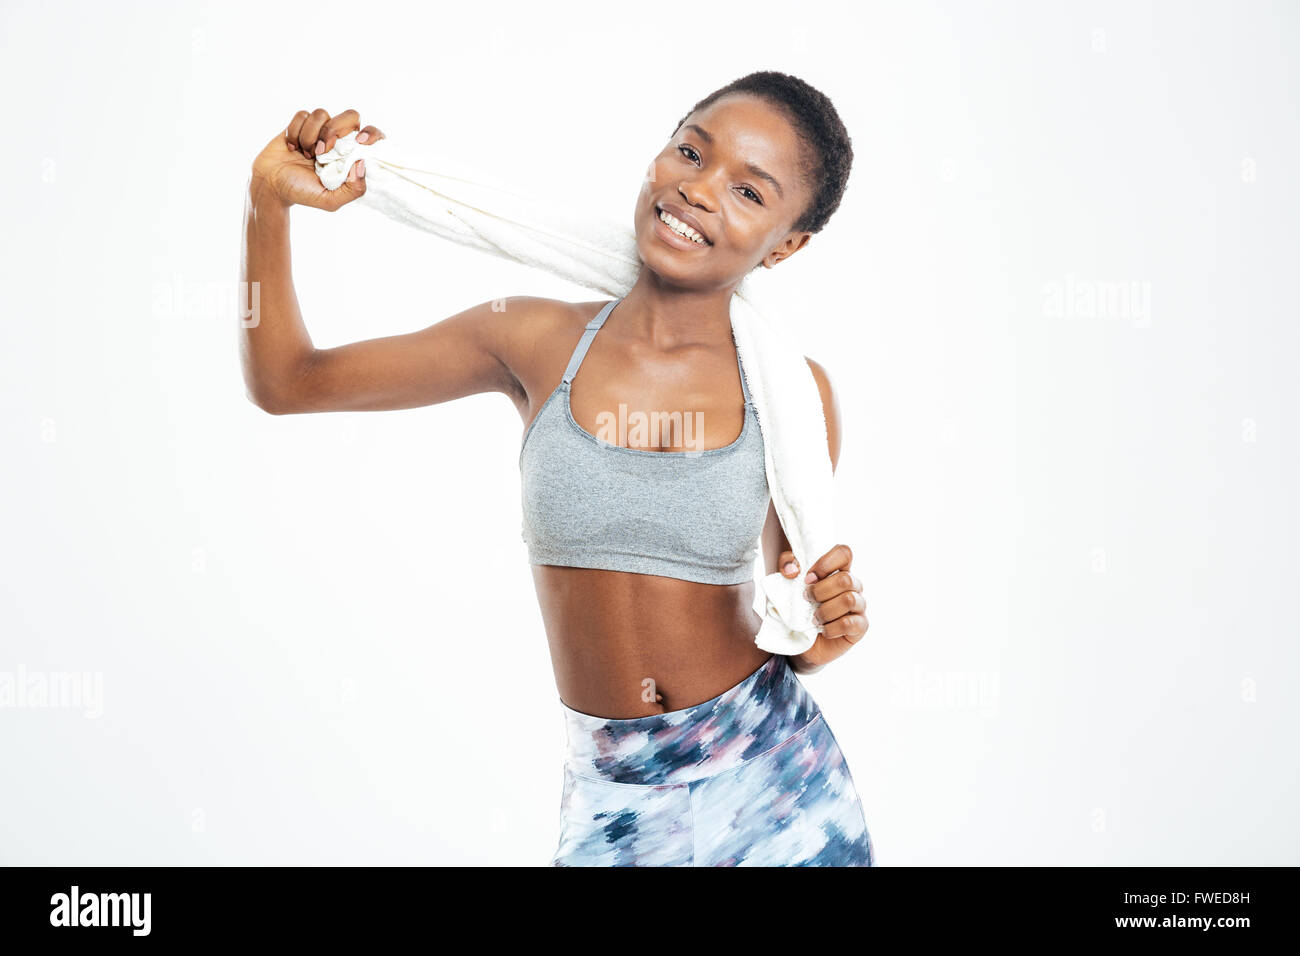 Happy lovely young african american sportswoman standing and posing with towel over white background Stock Photo